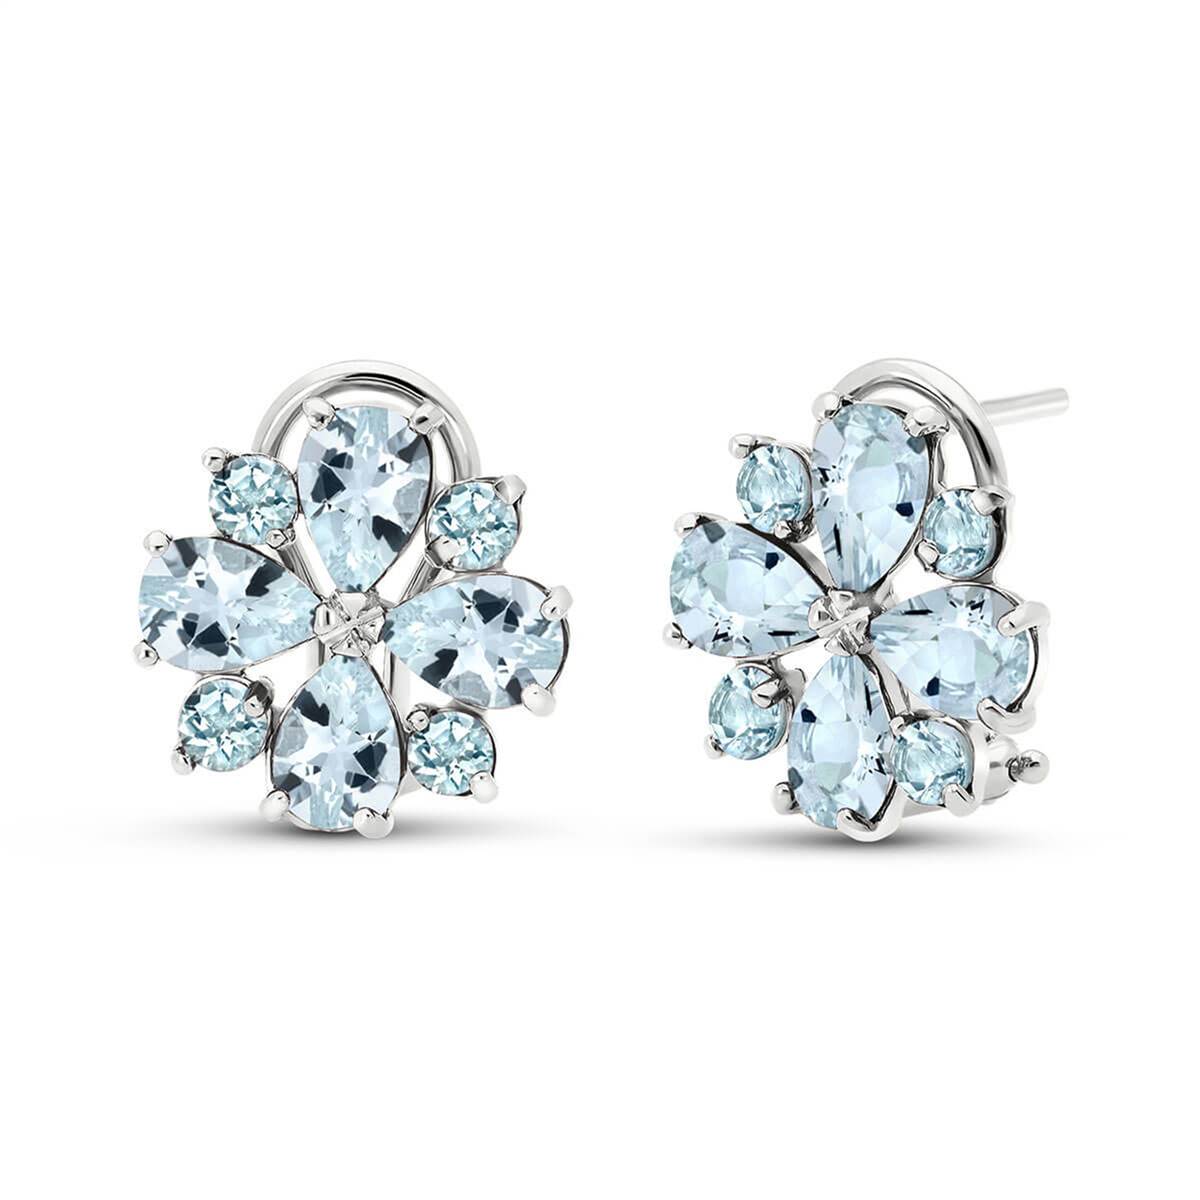 4.85 Carat 14K Solid White Gold French Clips Earrings Natural Aquamarine